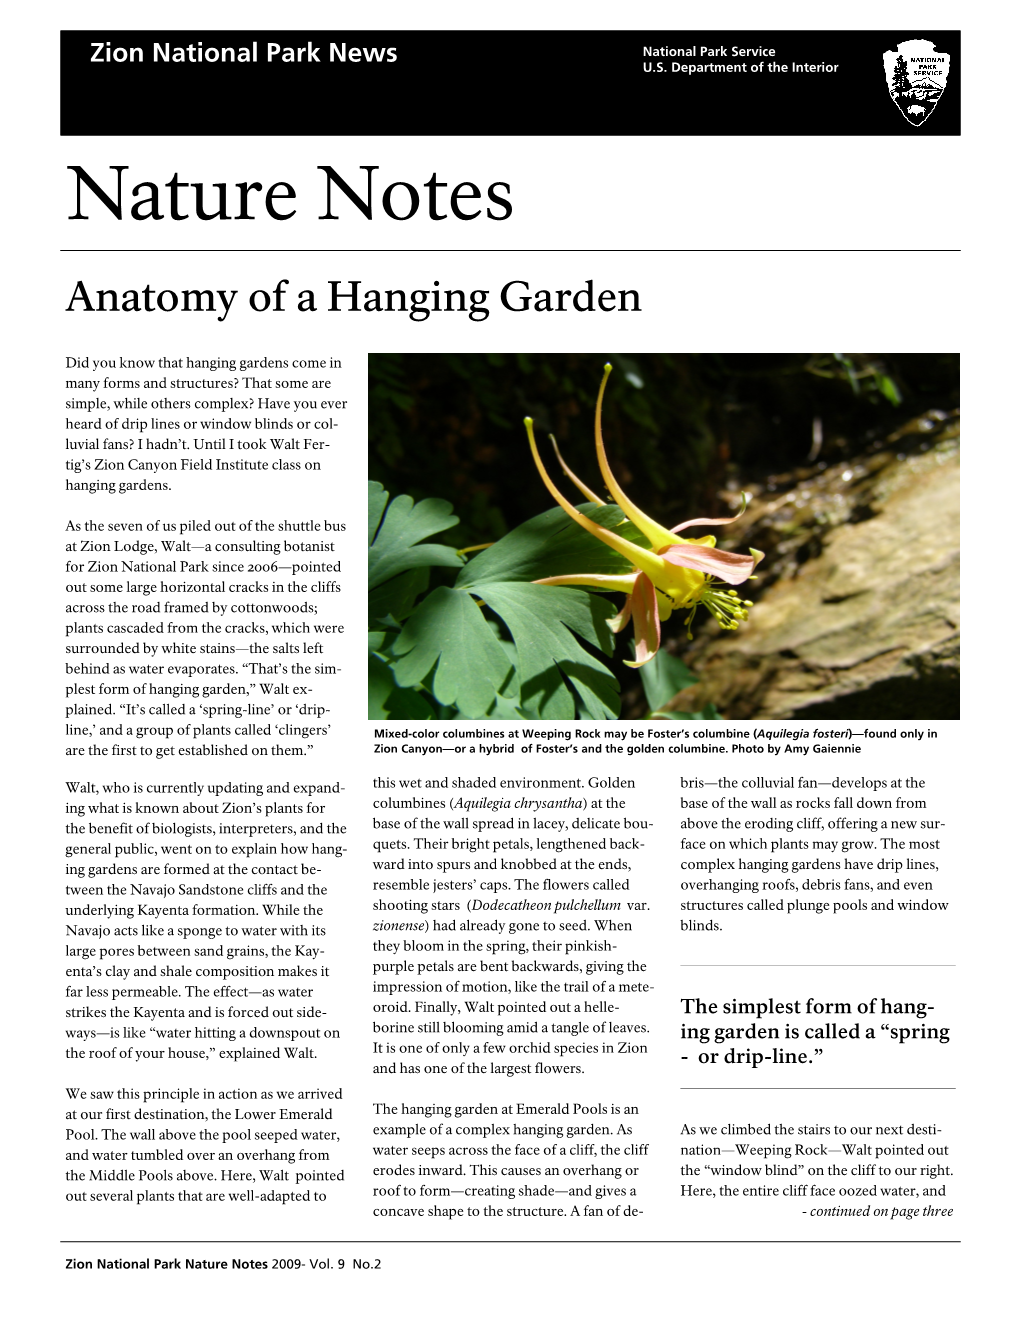 Nature Notes Anatomy of a Hanging Garden